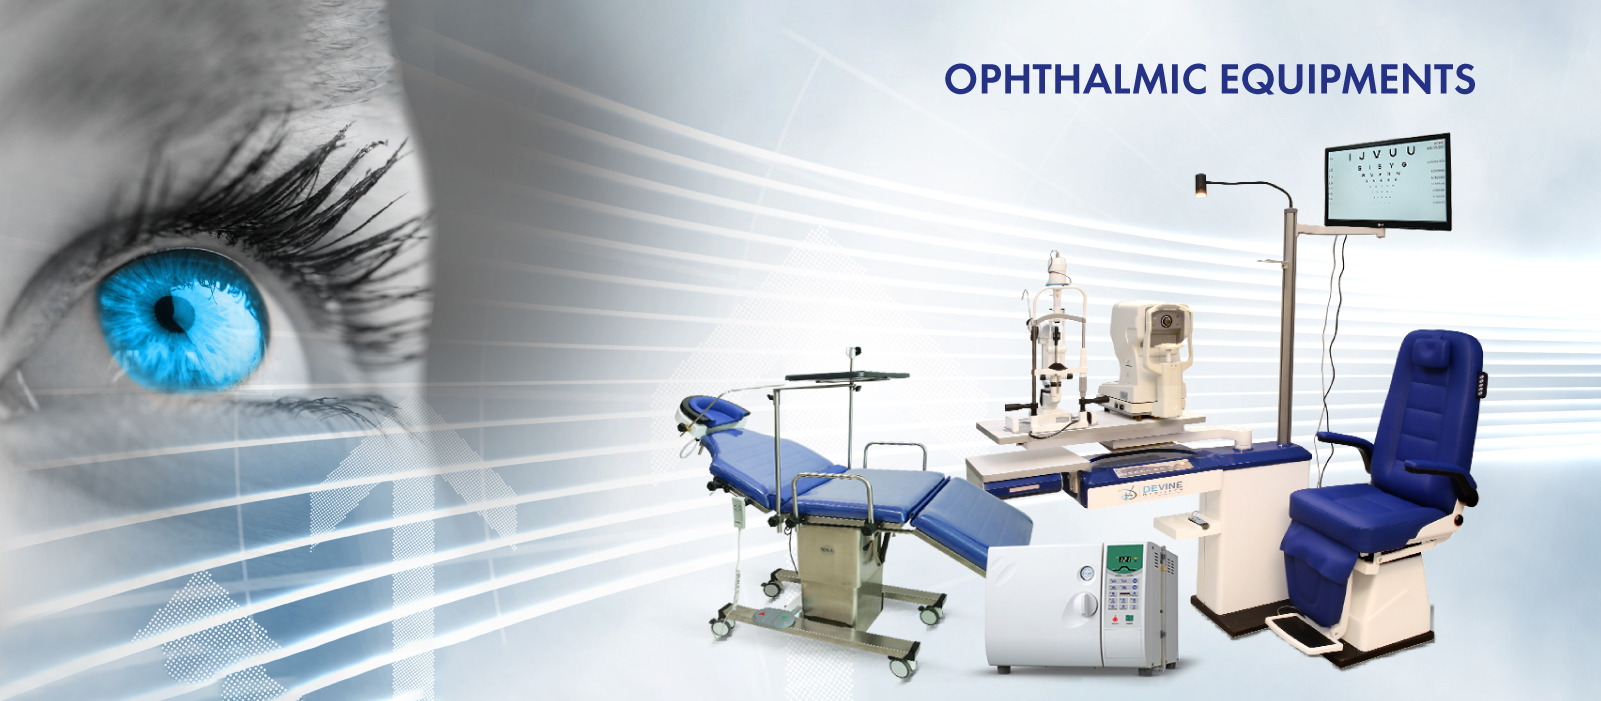 Ophthalmic Equipment Supplies in India